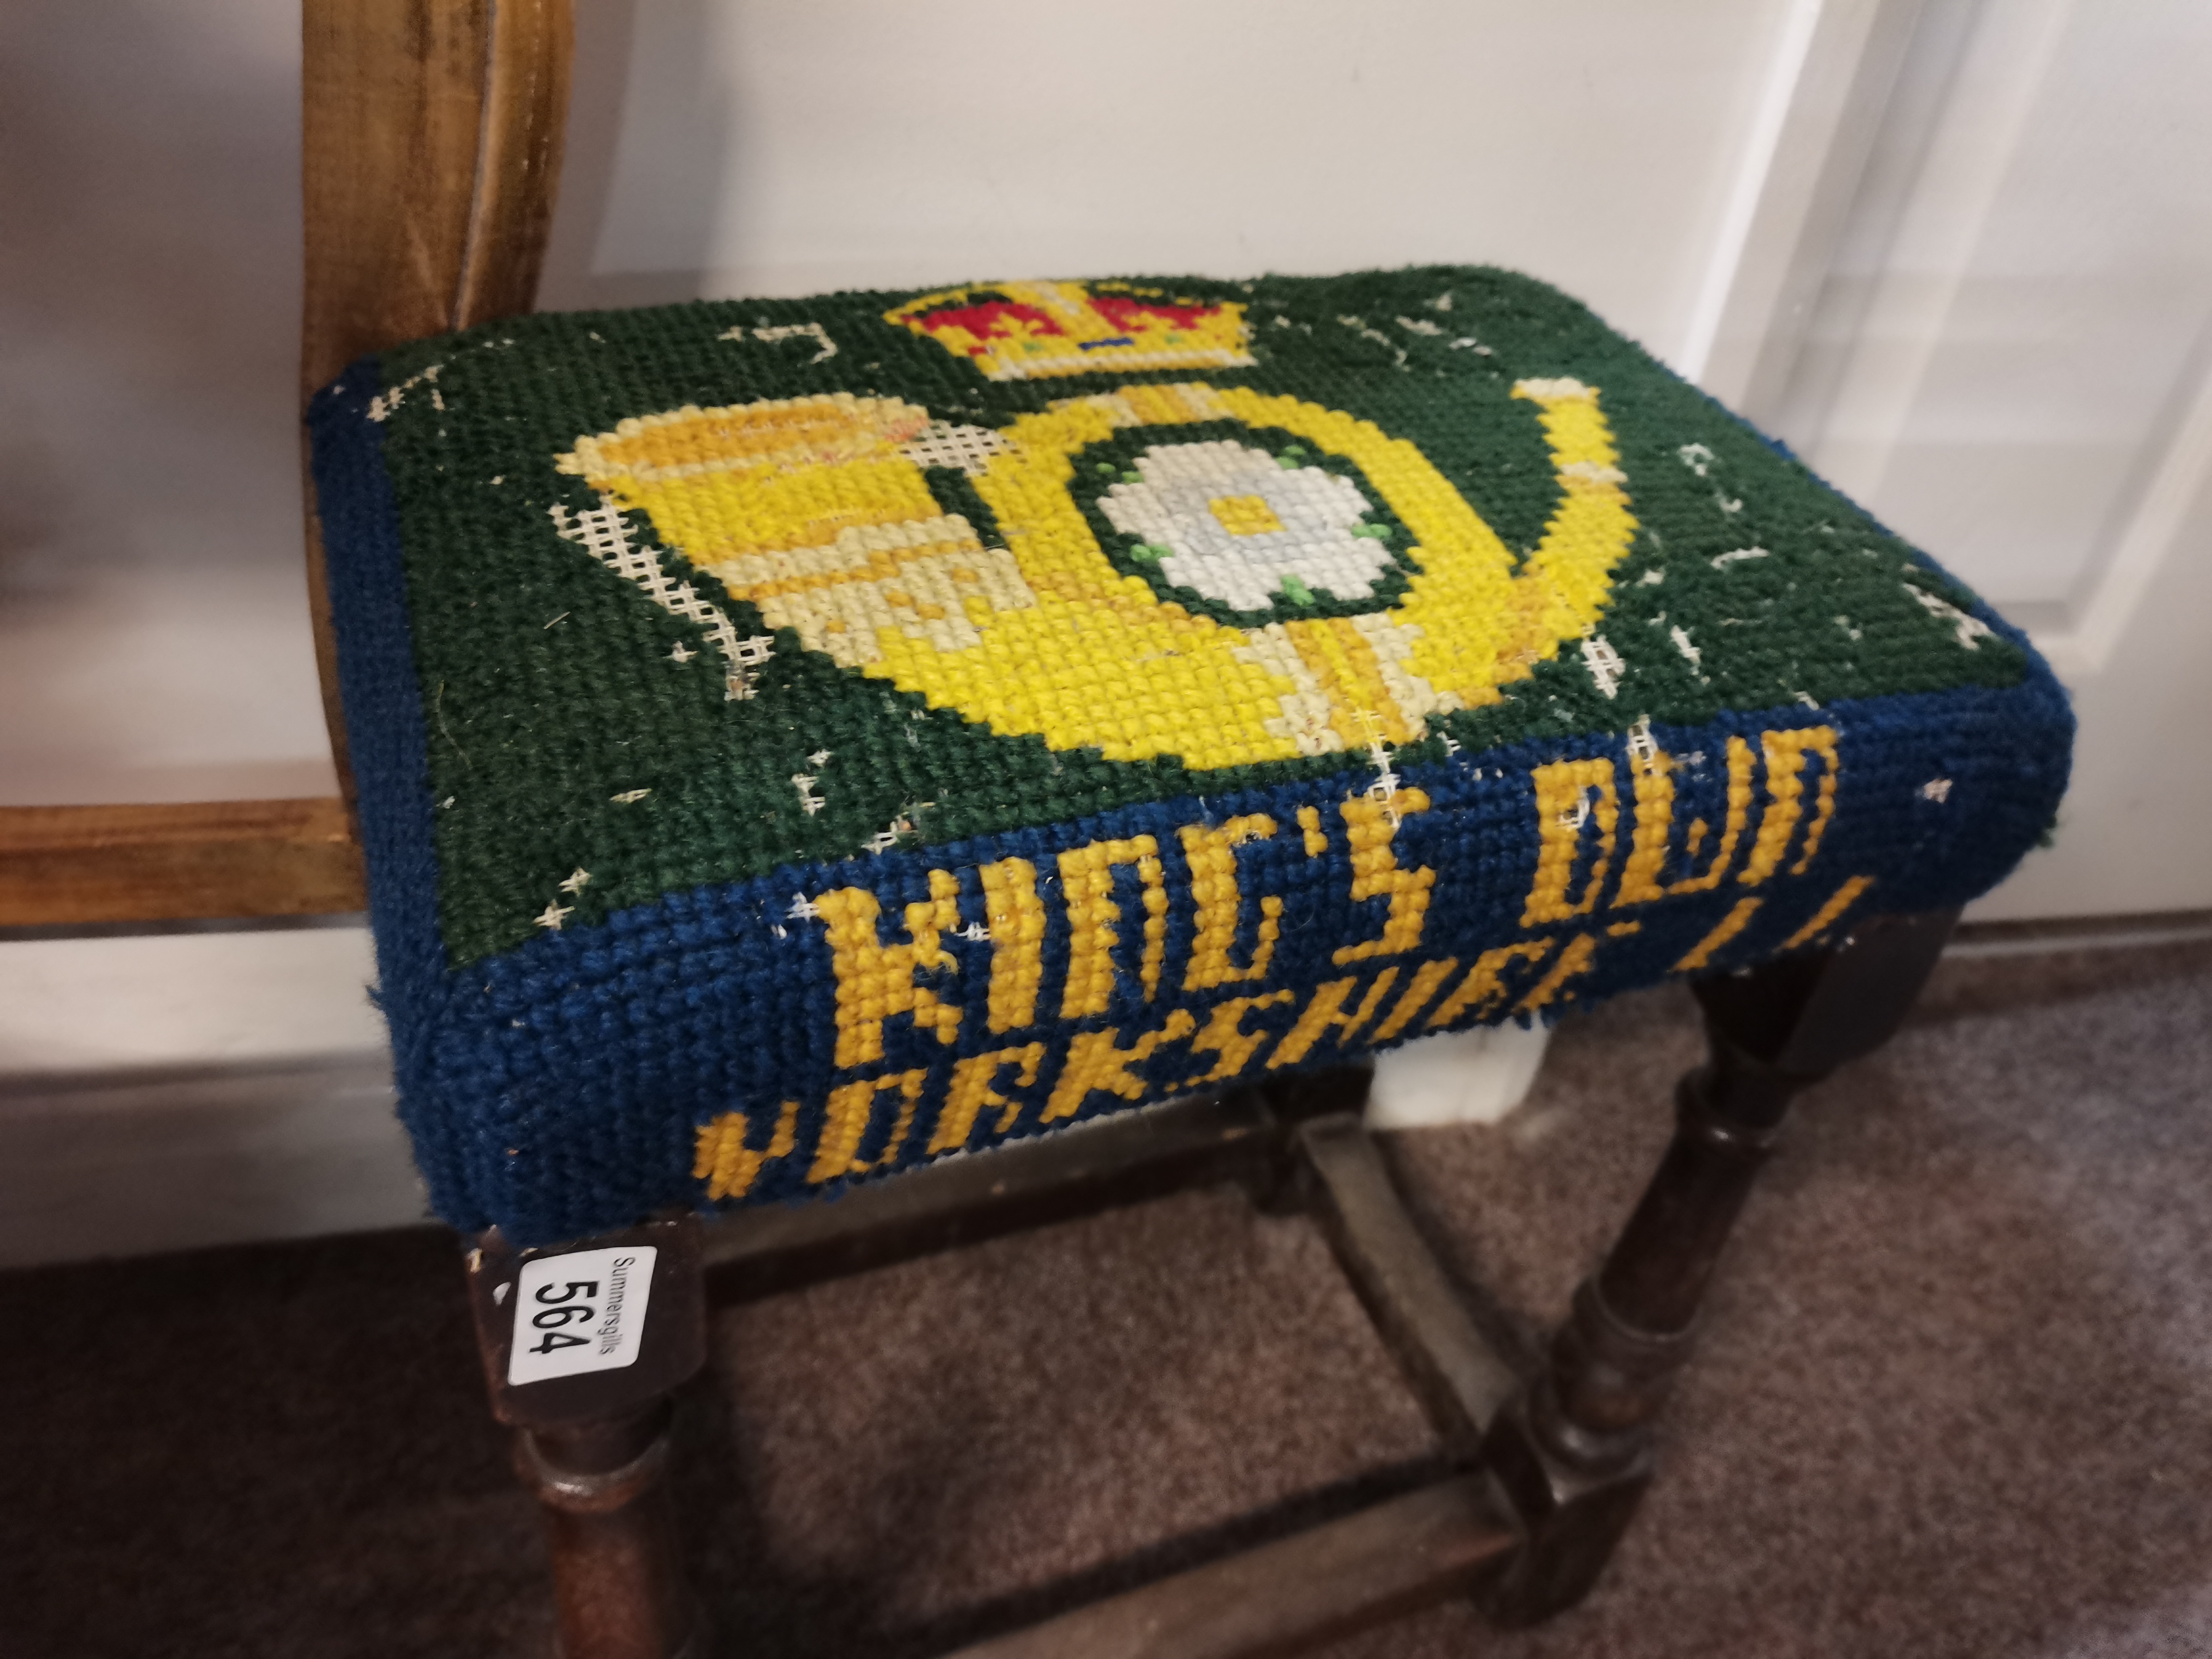 Military Joint stool with tapestry KINGS OWN emblem - Image 2 of 3